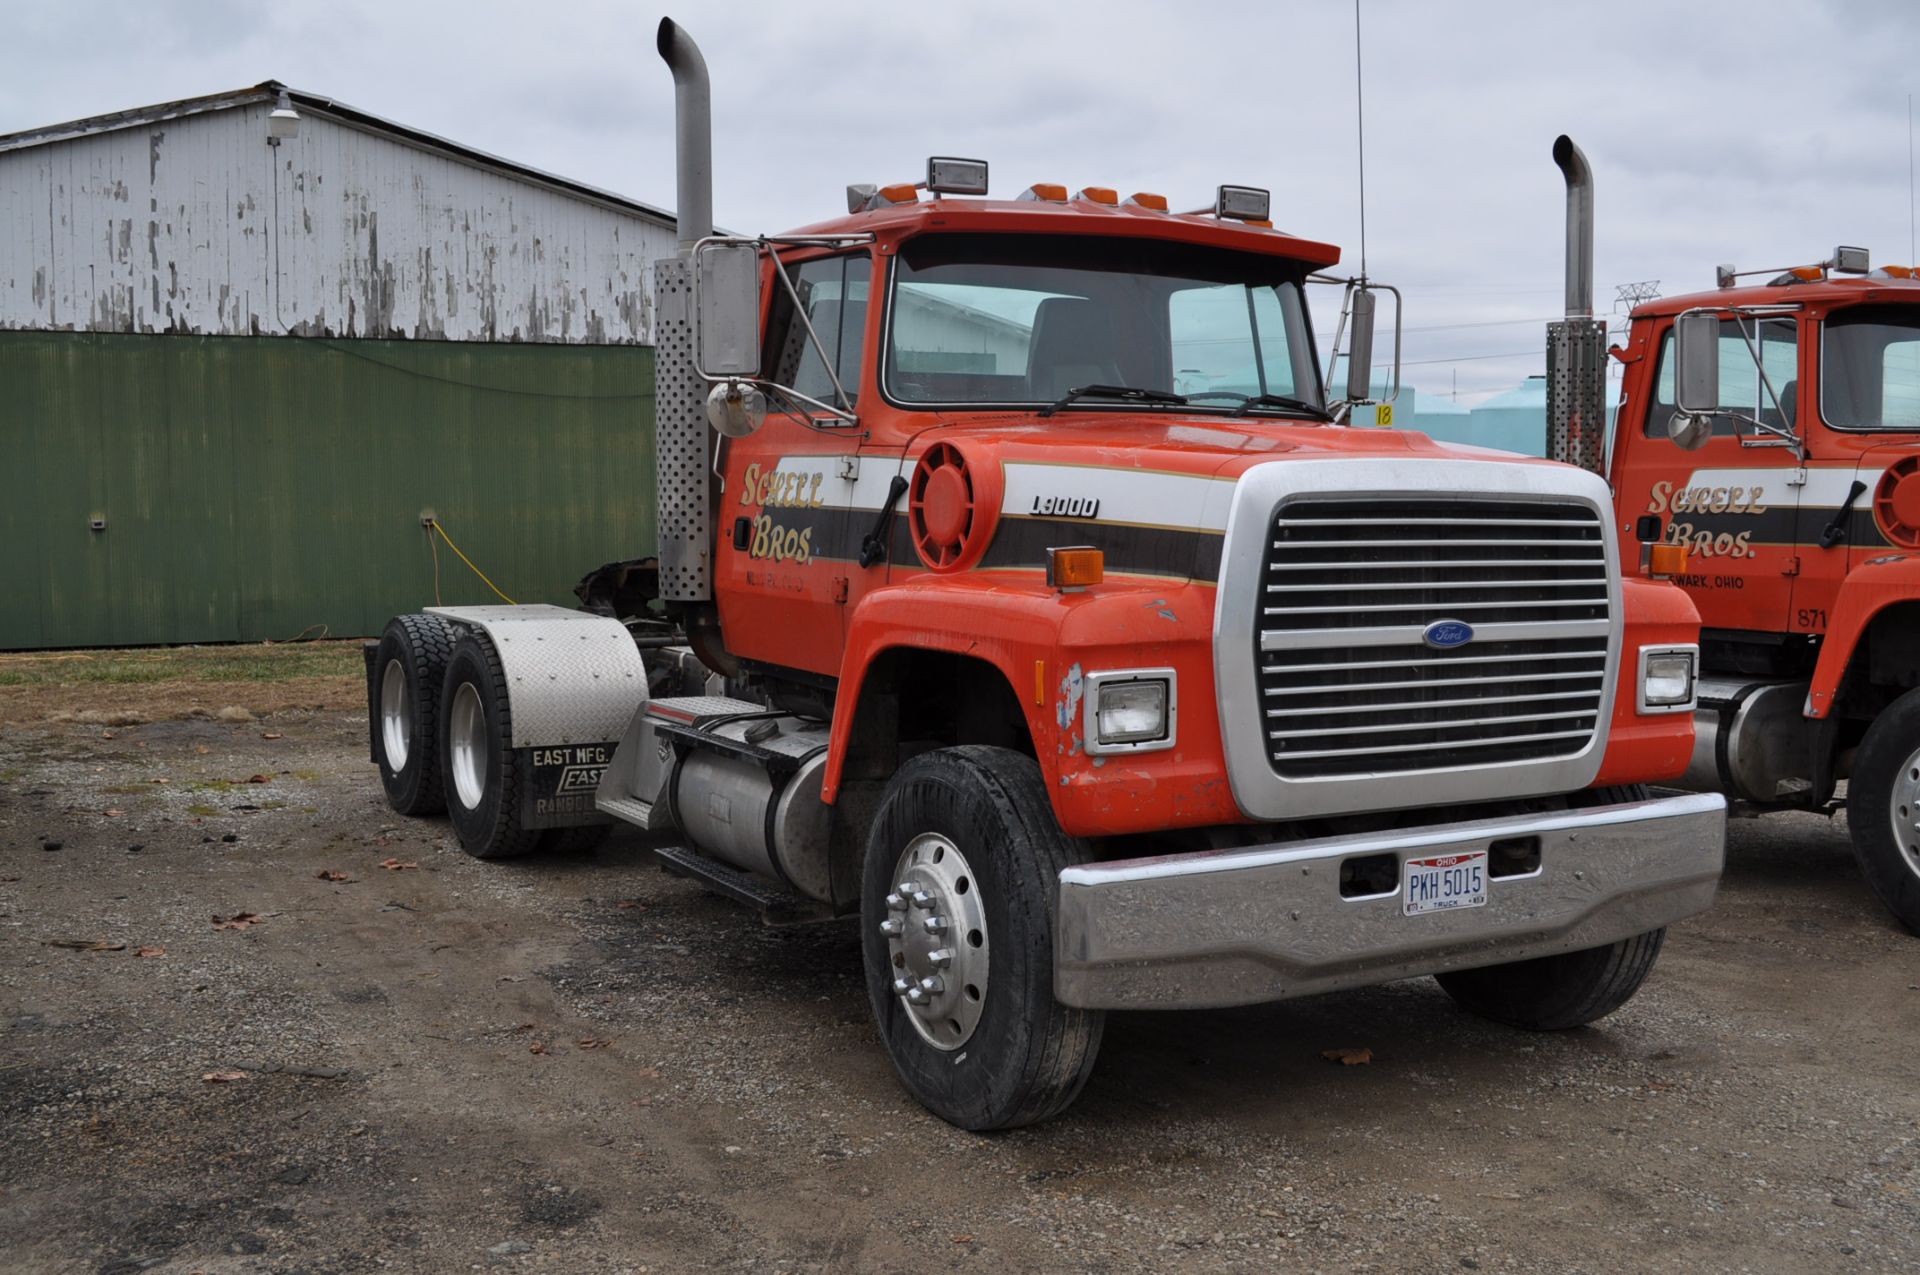 1989 Ford L9000 semi truck, day cab, 3406B CAT, 10 speed, spring ride, REBUILT SALVAGE TITLE - Image 2 of 20